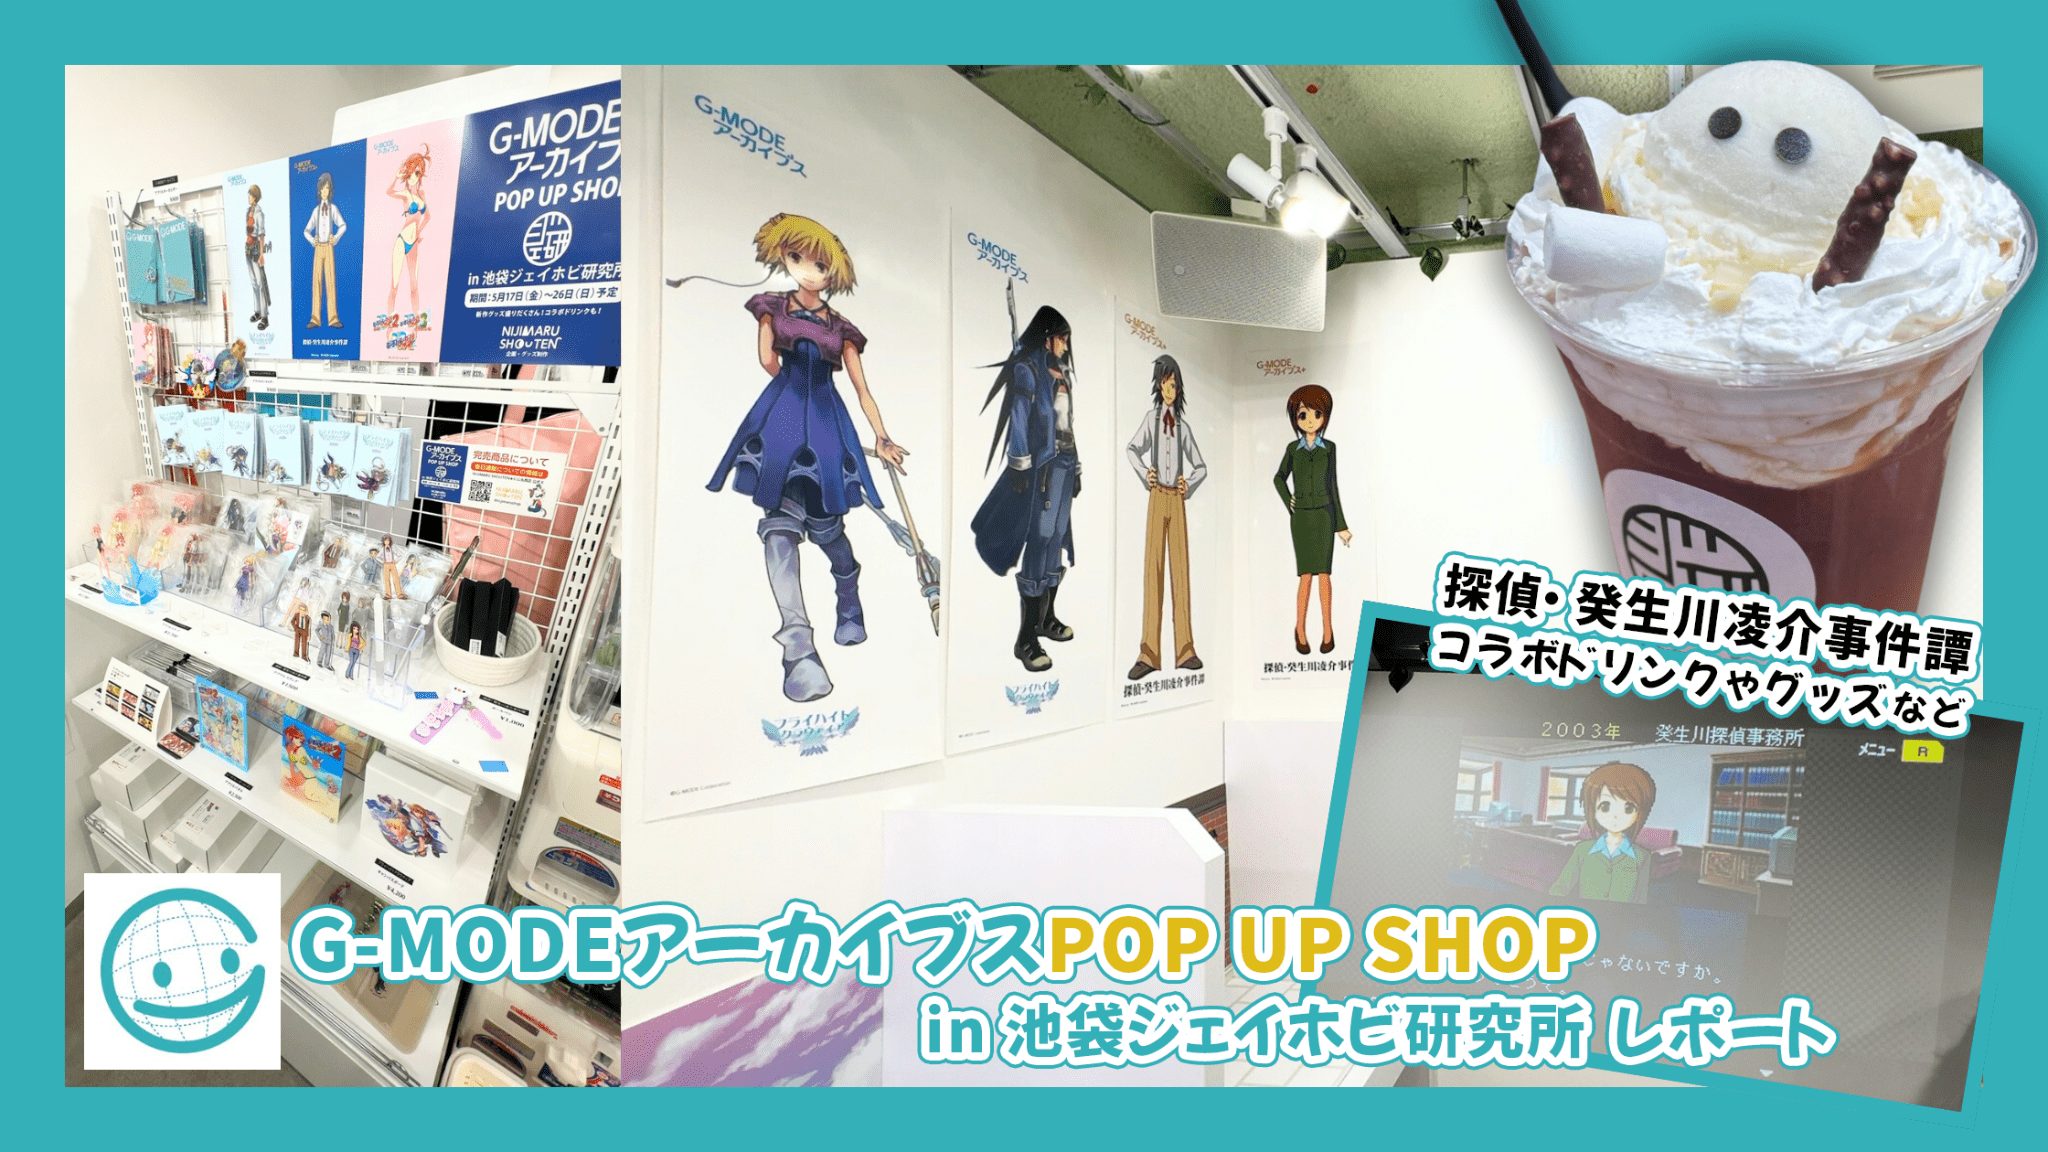 G-MODEアーカイブスPOP UP SHOP in 池袋ジェイホビ研究所 レポート